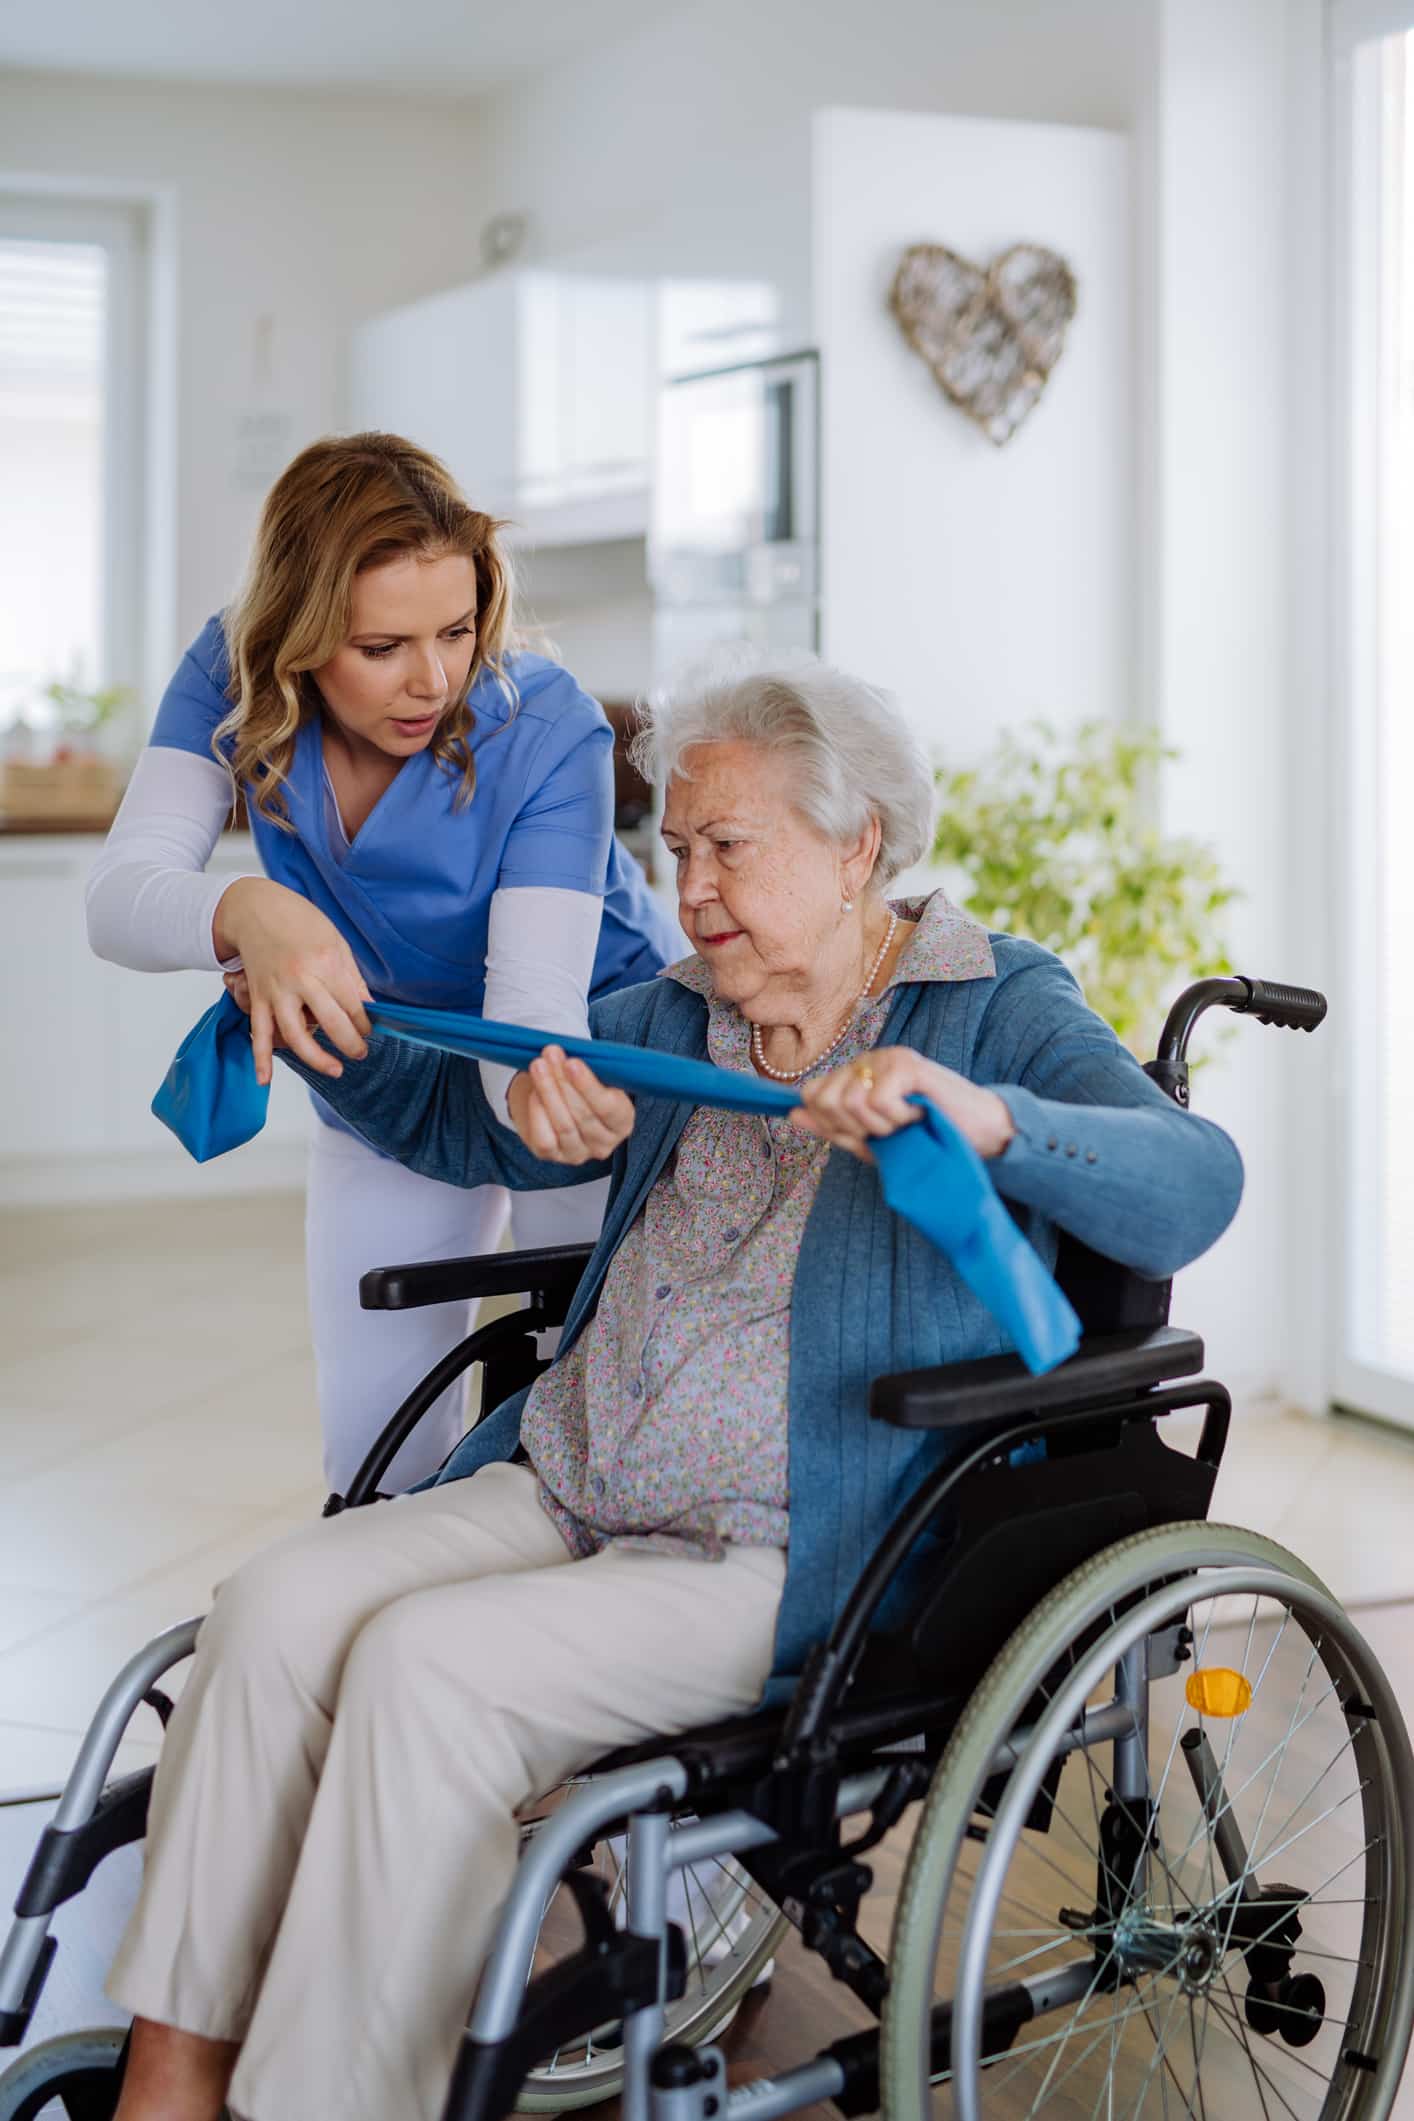 Nurse exercising with senior woman at her home, concept of a healthcare and rehabilitation. This could have been avoided by having Slip No More anti slip products applied to the floors. 8 Tips for creating safe stair for the elderly